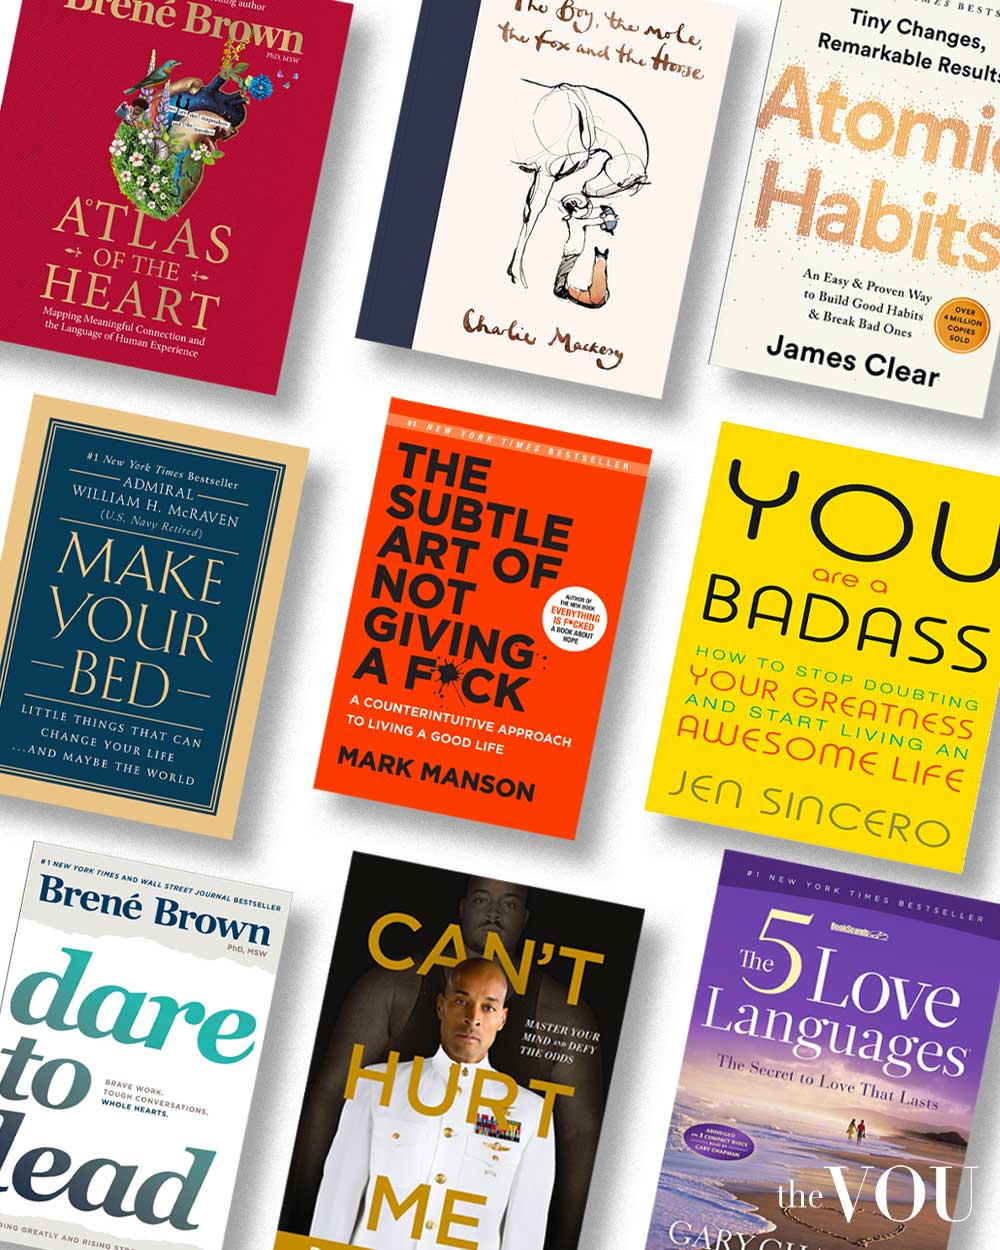 20 Best Self-Help Books For Women - Special Learning House